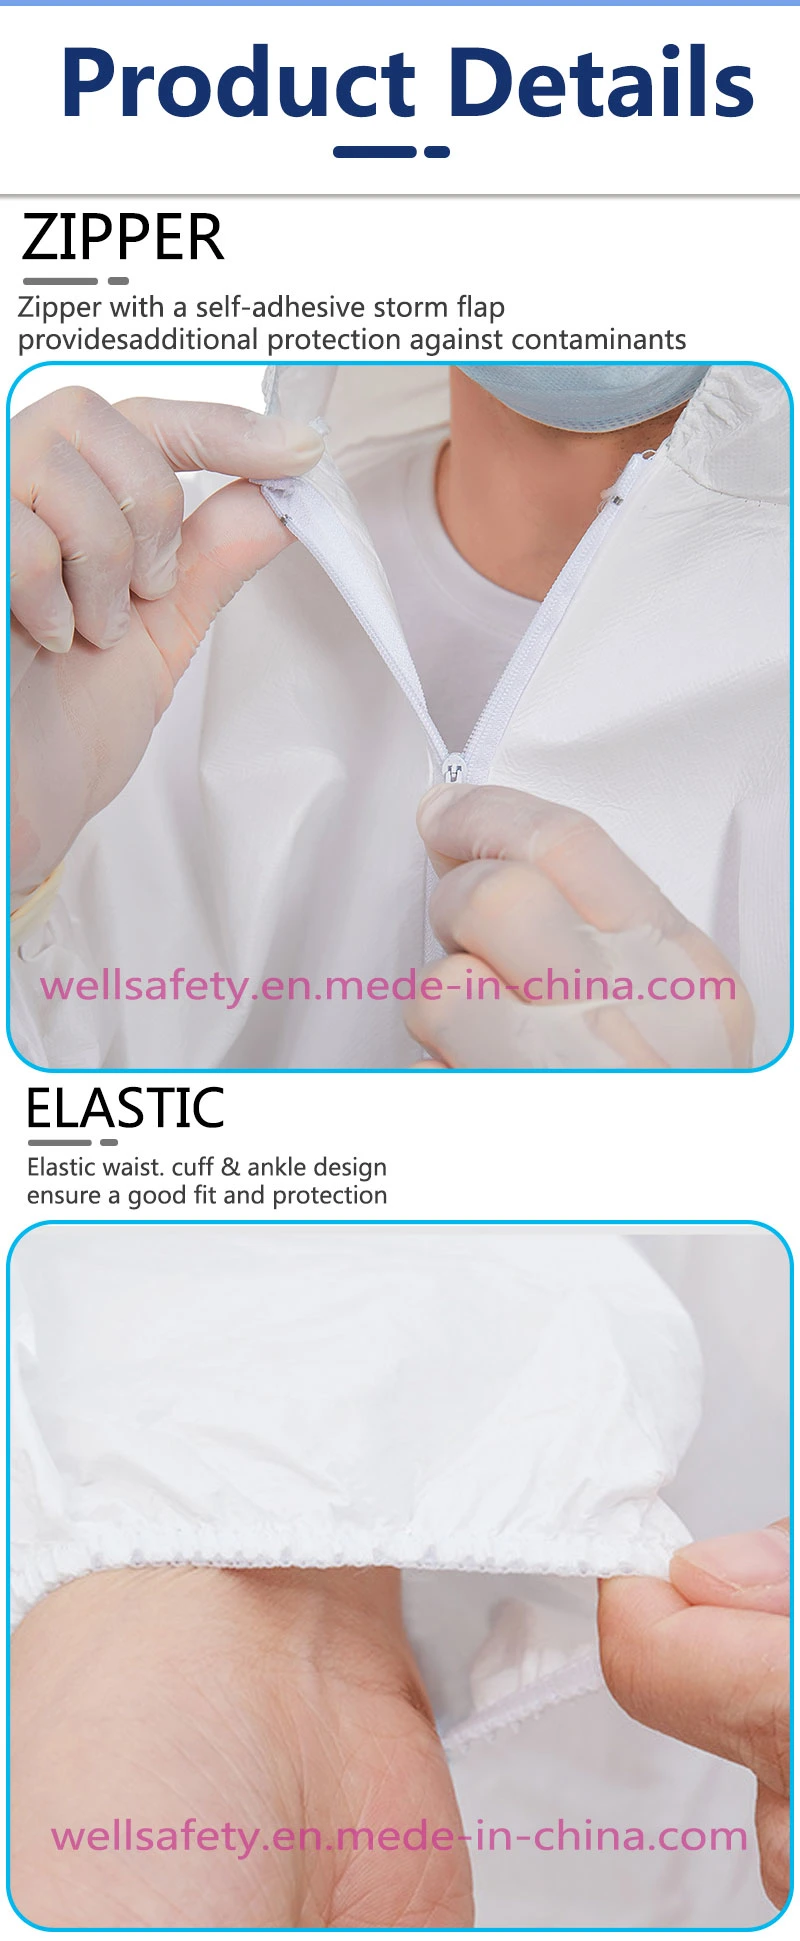 Factory Price En14126 Tyvek Coverall Cat3 SMS+PE 60g Coverall Chemical Reusable Isolation Gowns Protective Clothing Type 5/6 Washable Coverall Tyvek 400